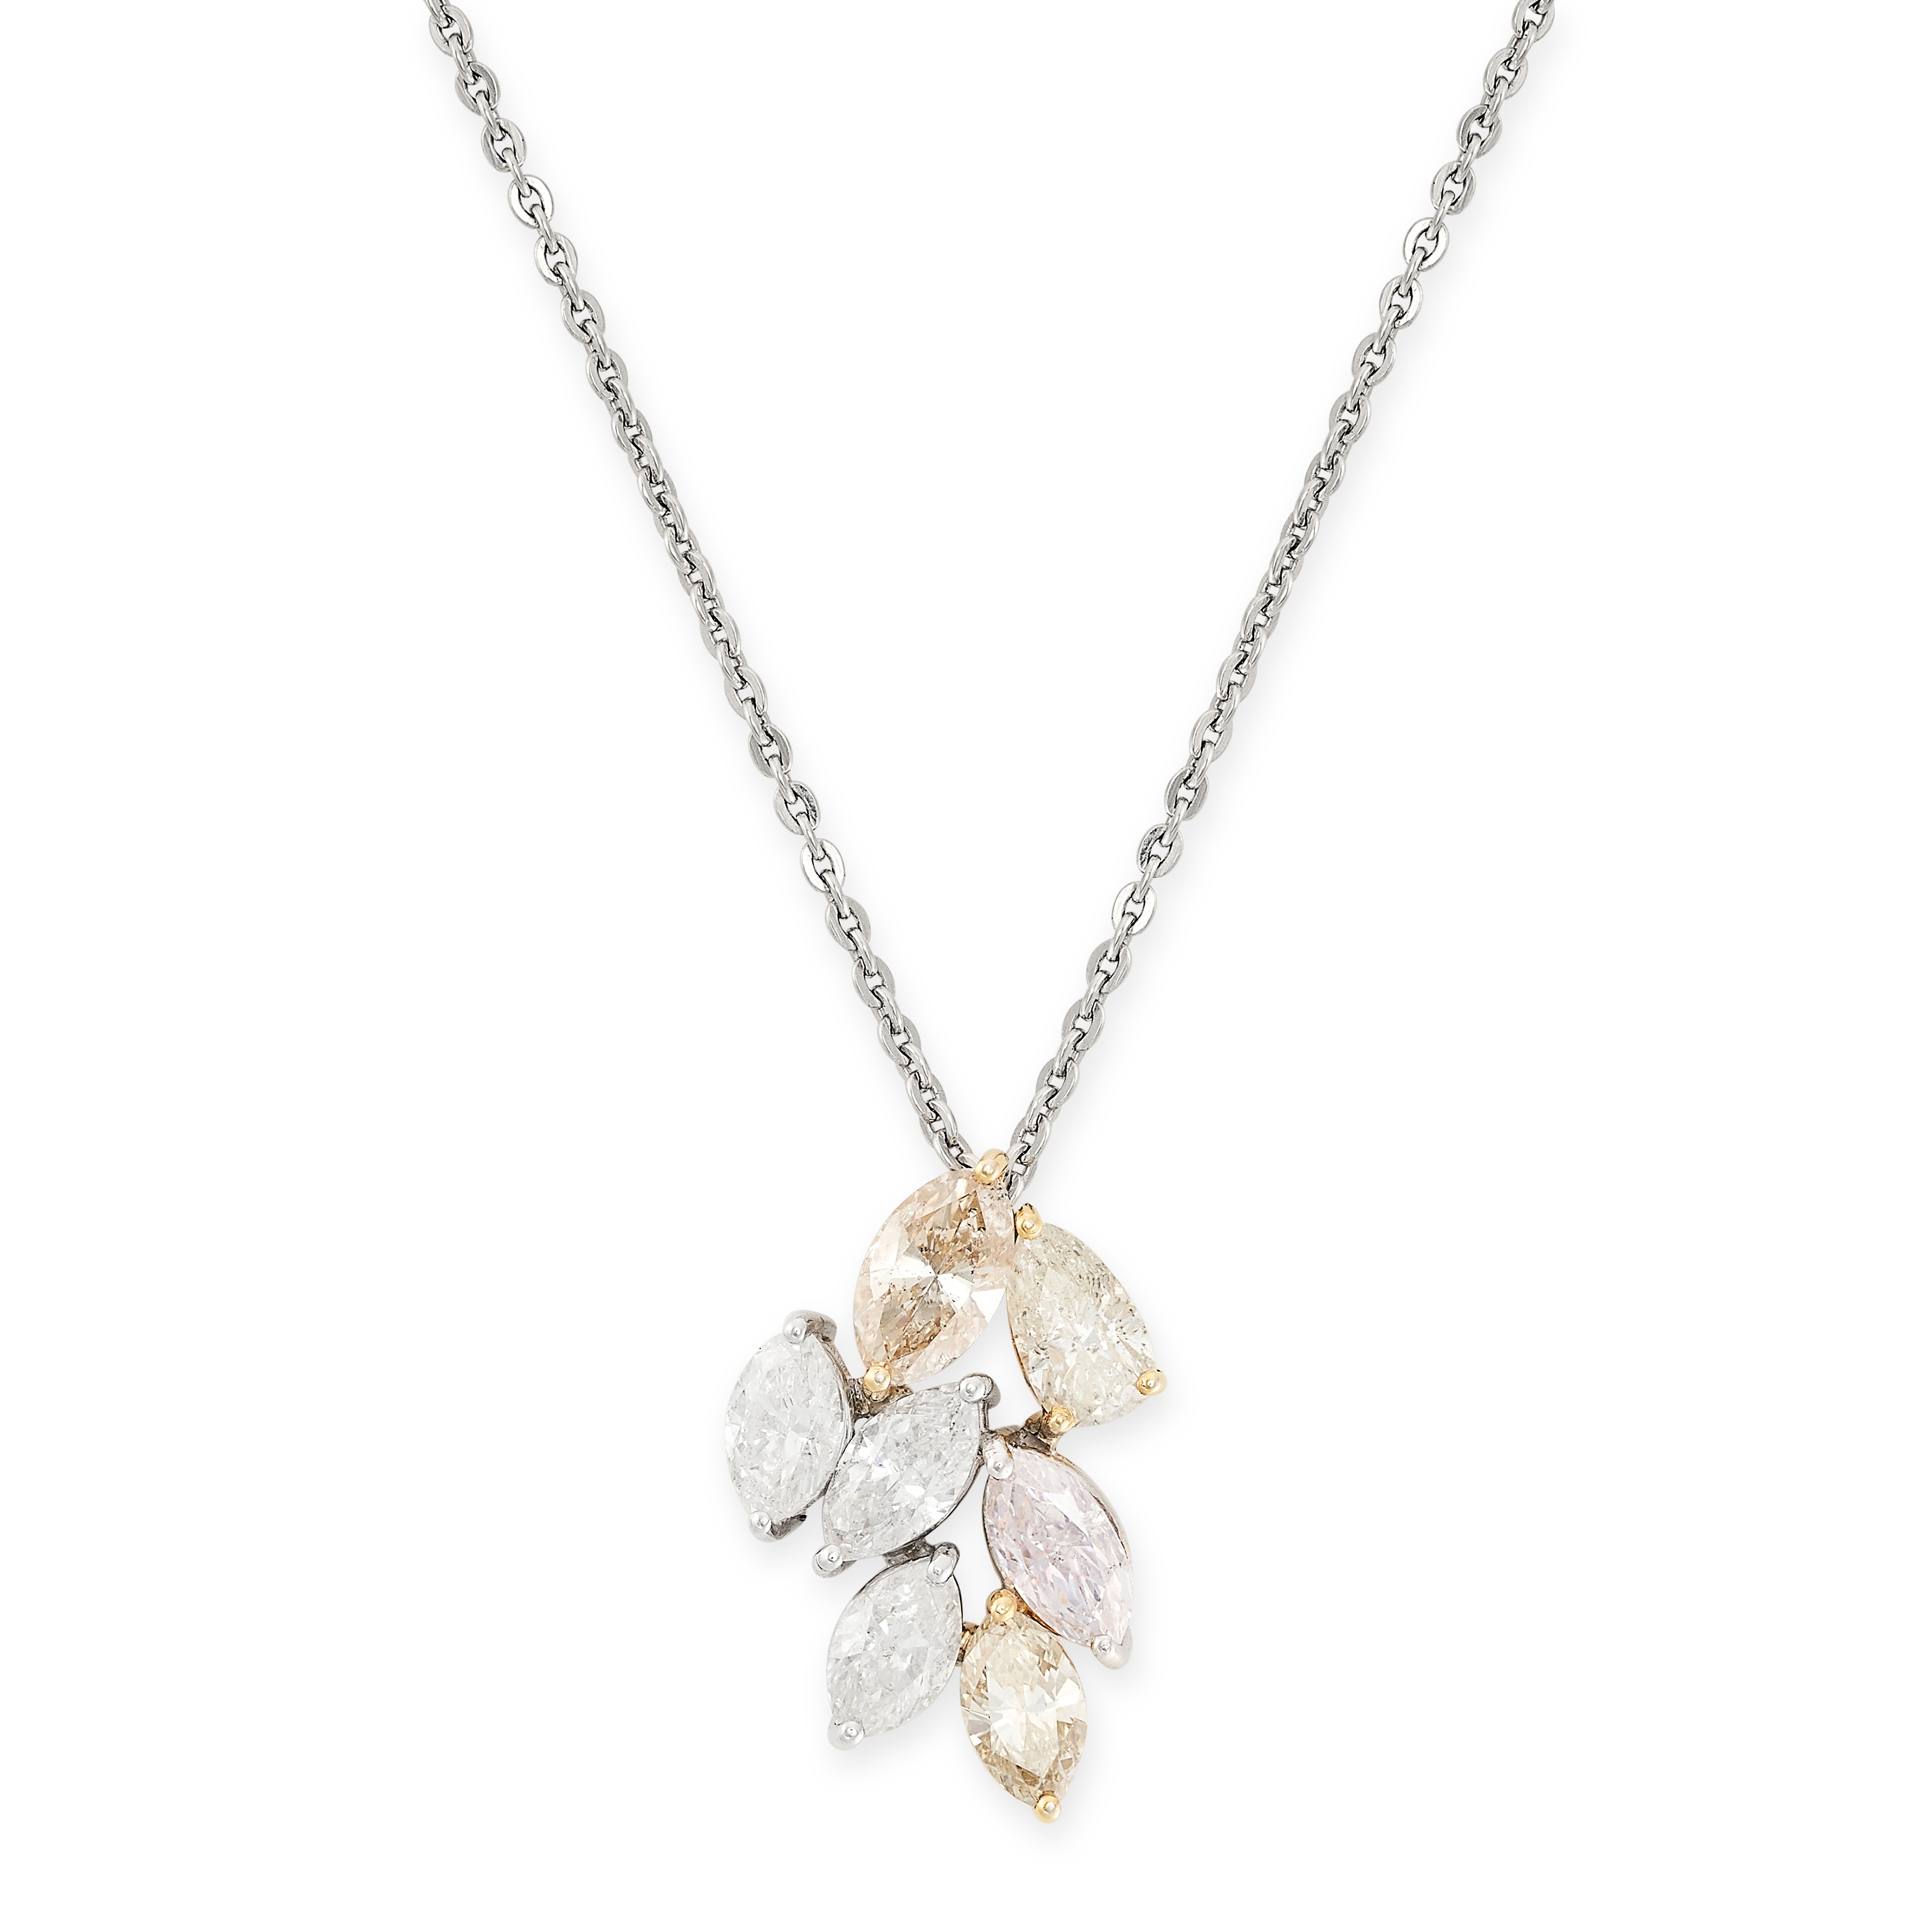 A DIAMOND CLUSTER PENDANT NECKLACE the pendant comprising a cluster of pear and marquise cut